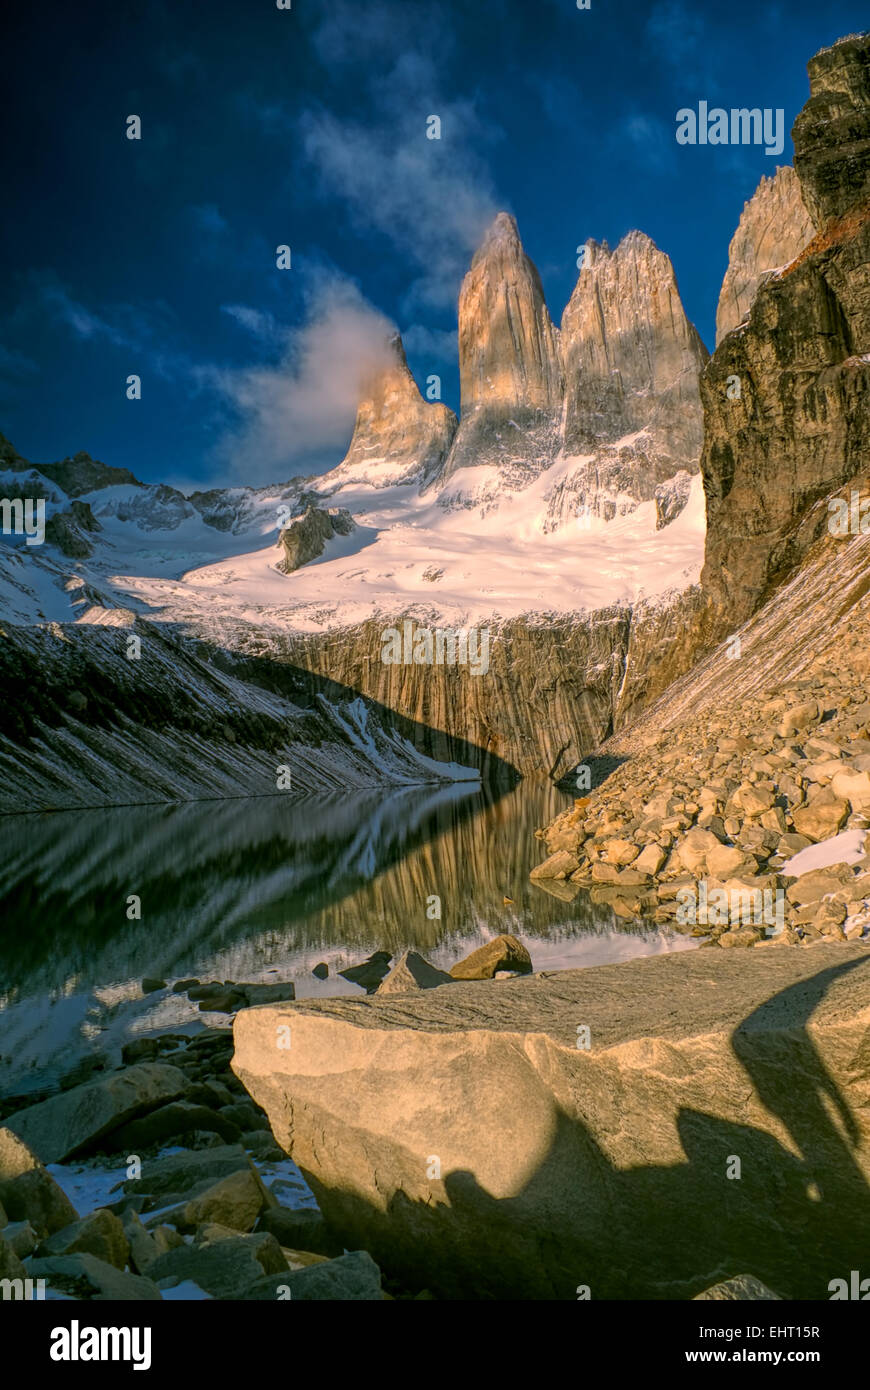 Parco nazionale Torres del Paine in sud americana Andes Foto Stock